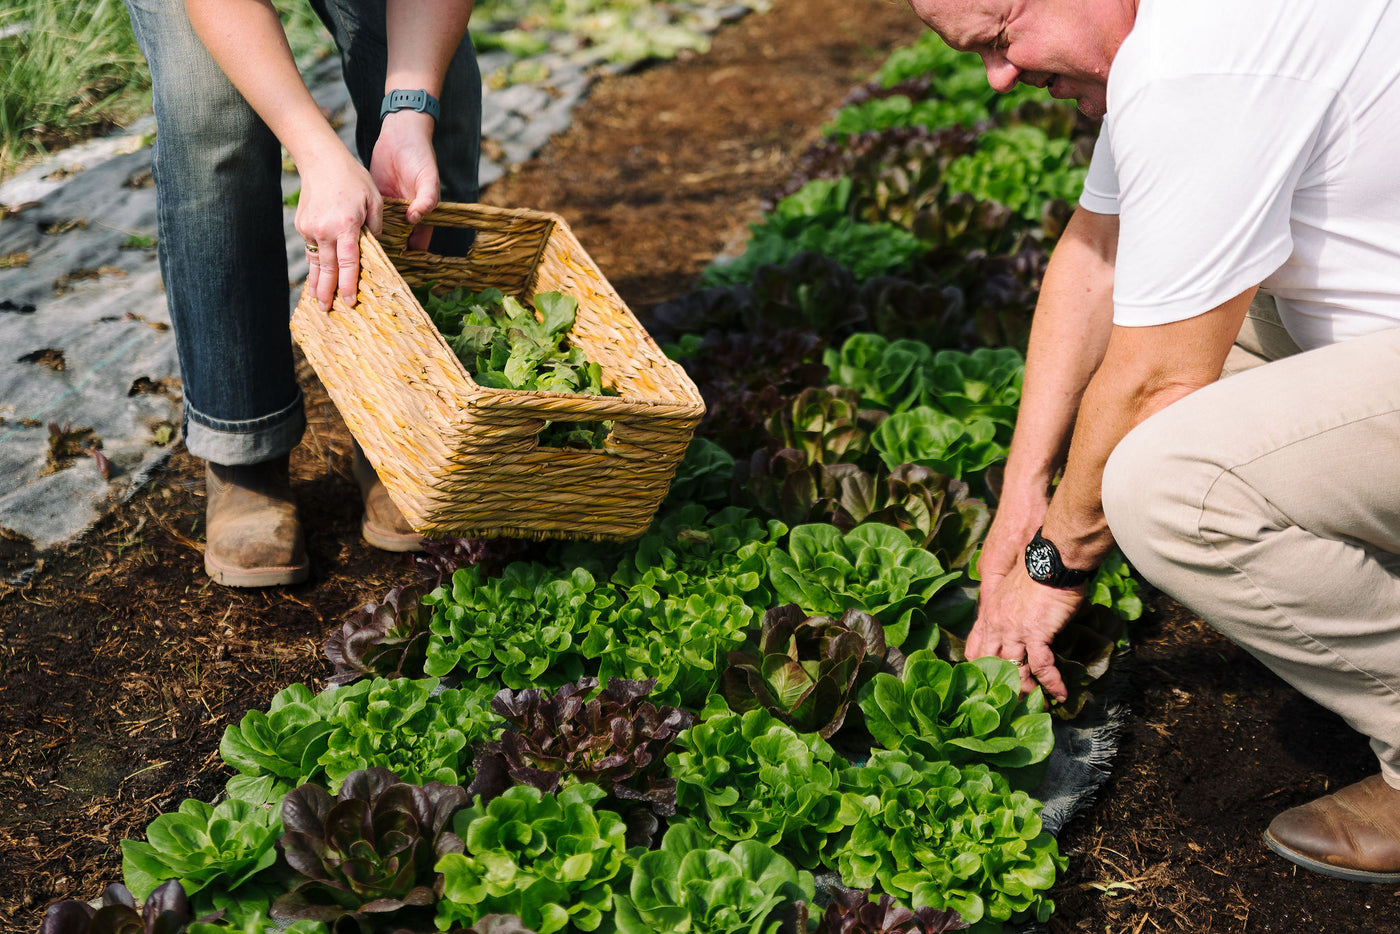 Kent and Michelle Krause working together, gathering fresh lettuce from their high tunnel at Krause House Farms.